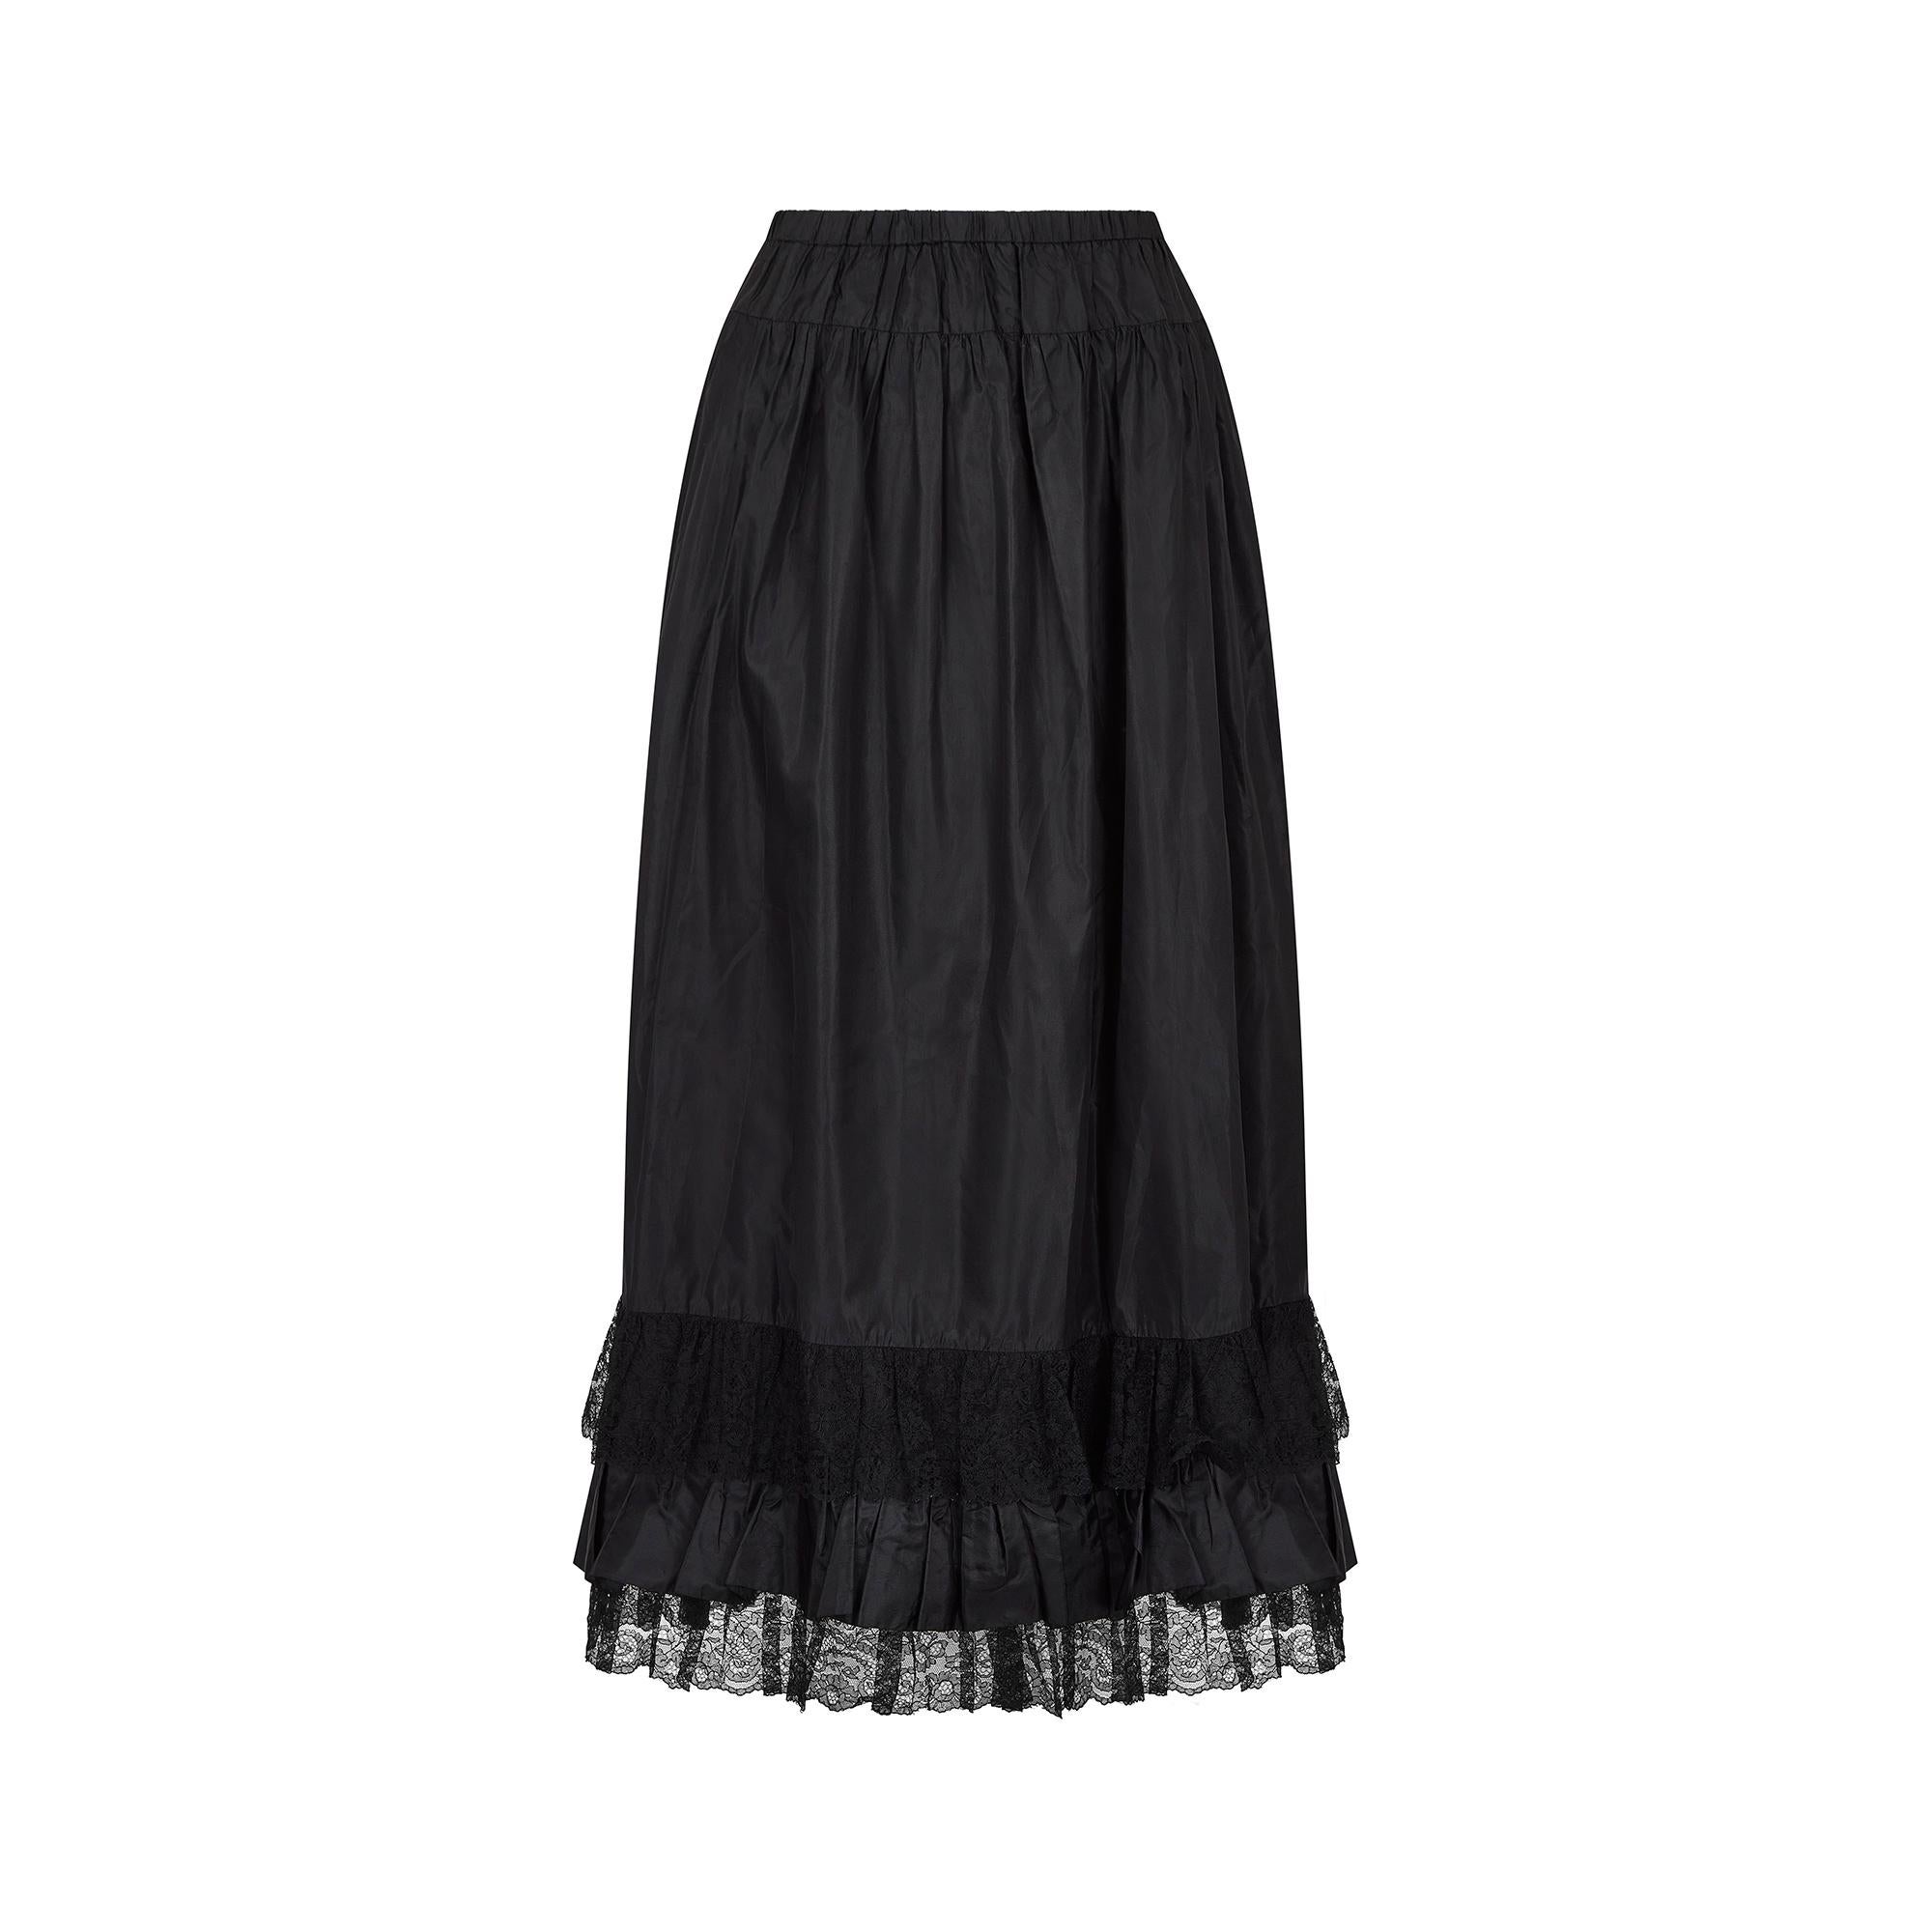 This late 1970s to early 1980s black silk taffeta 'Victoriana' skirt is by Chloe and made to almost couture standards.  Throughout the fashion House's history, Chloe has always subscribed to fabulous attention to detail and quality fabrics; none